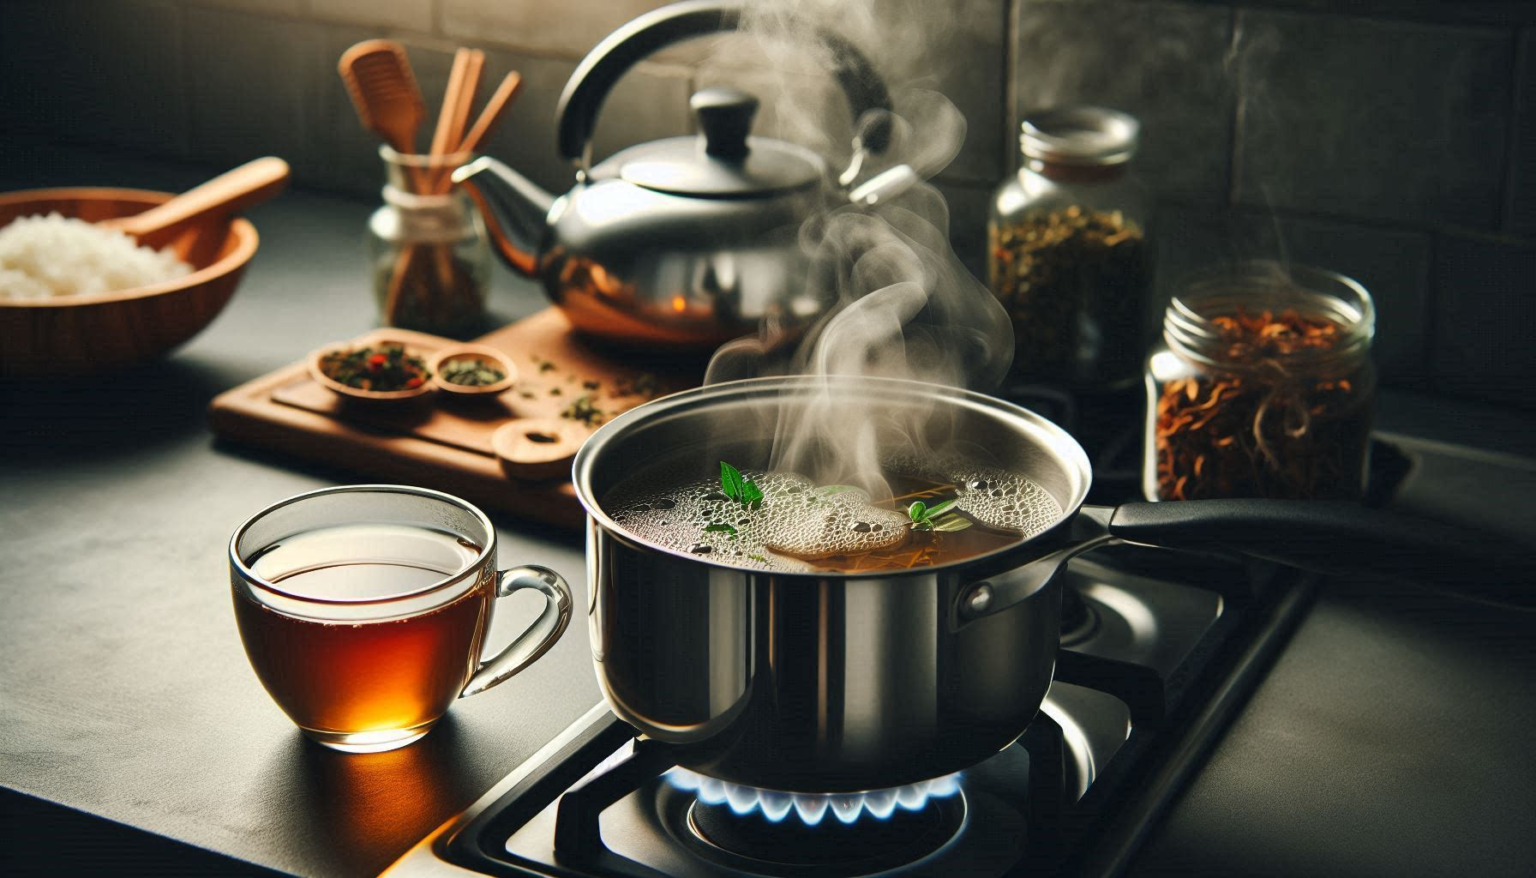 Simmer your herbal tea in a saucepan for a warm, soothing brew